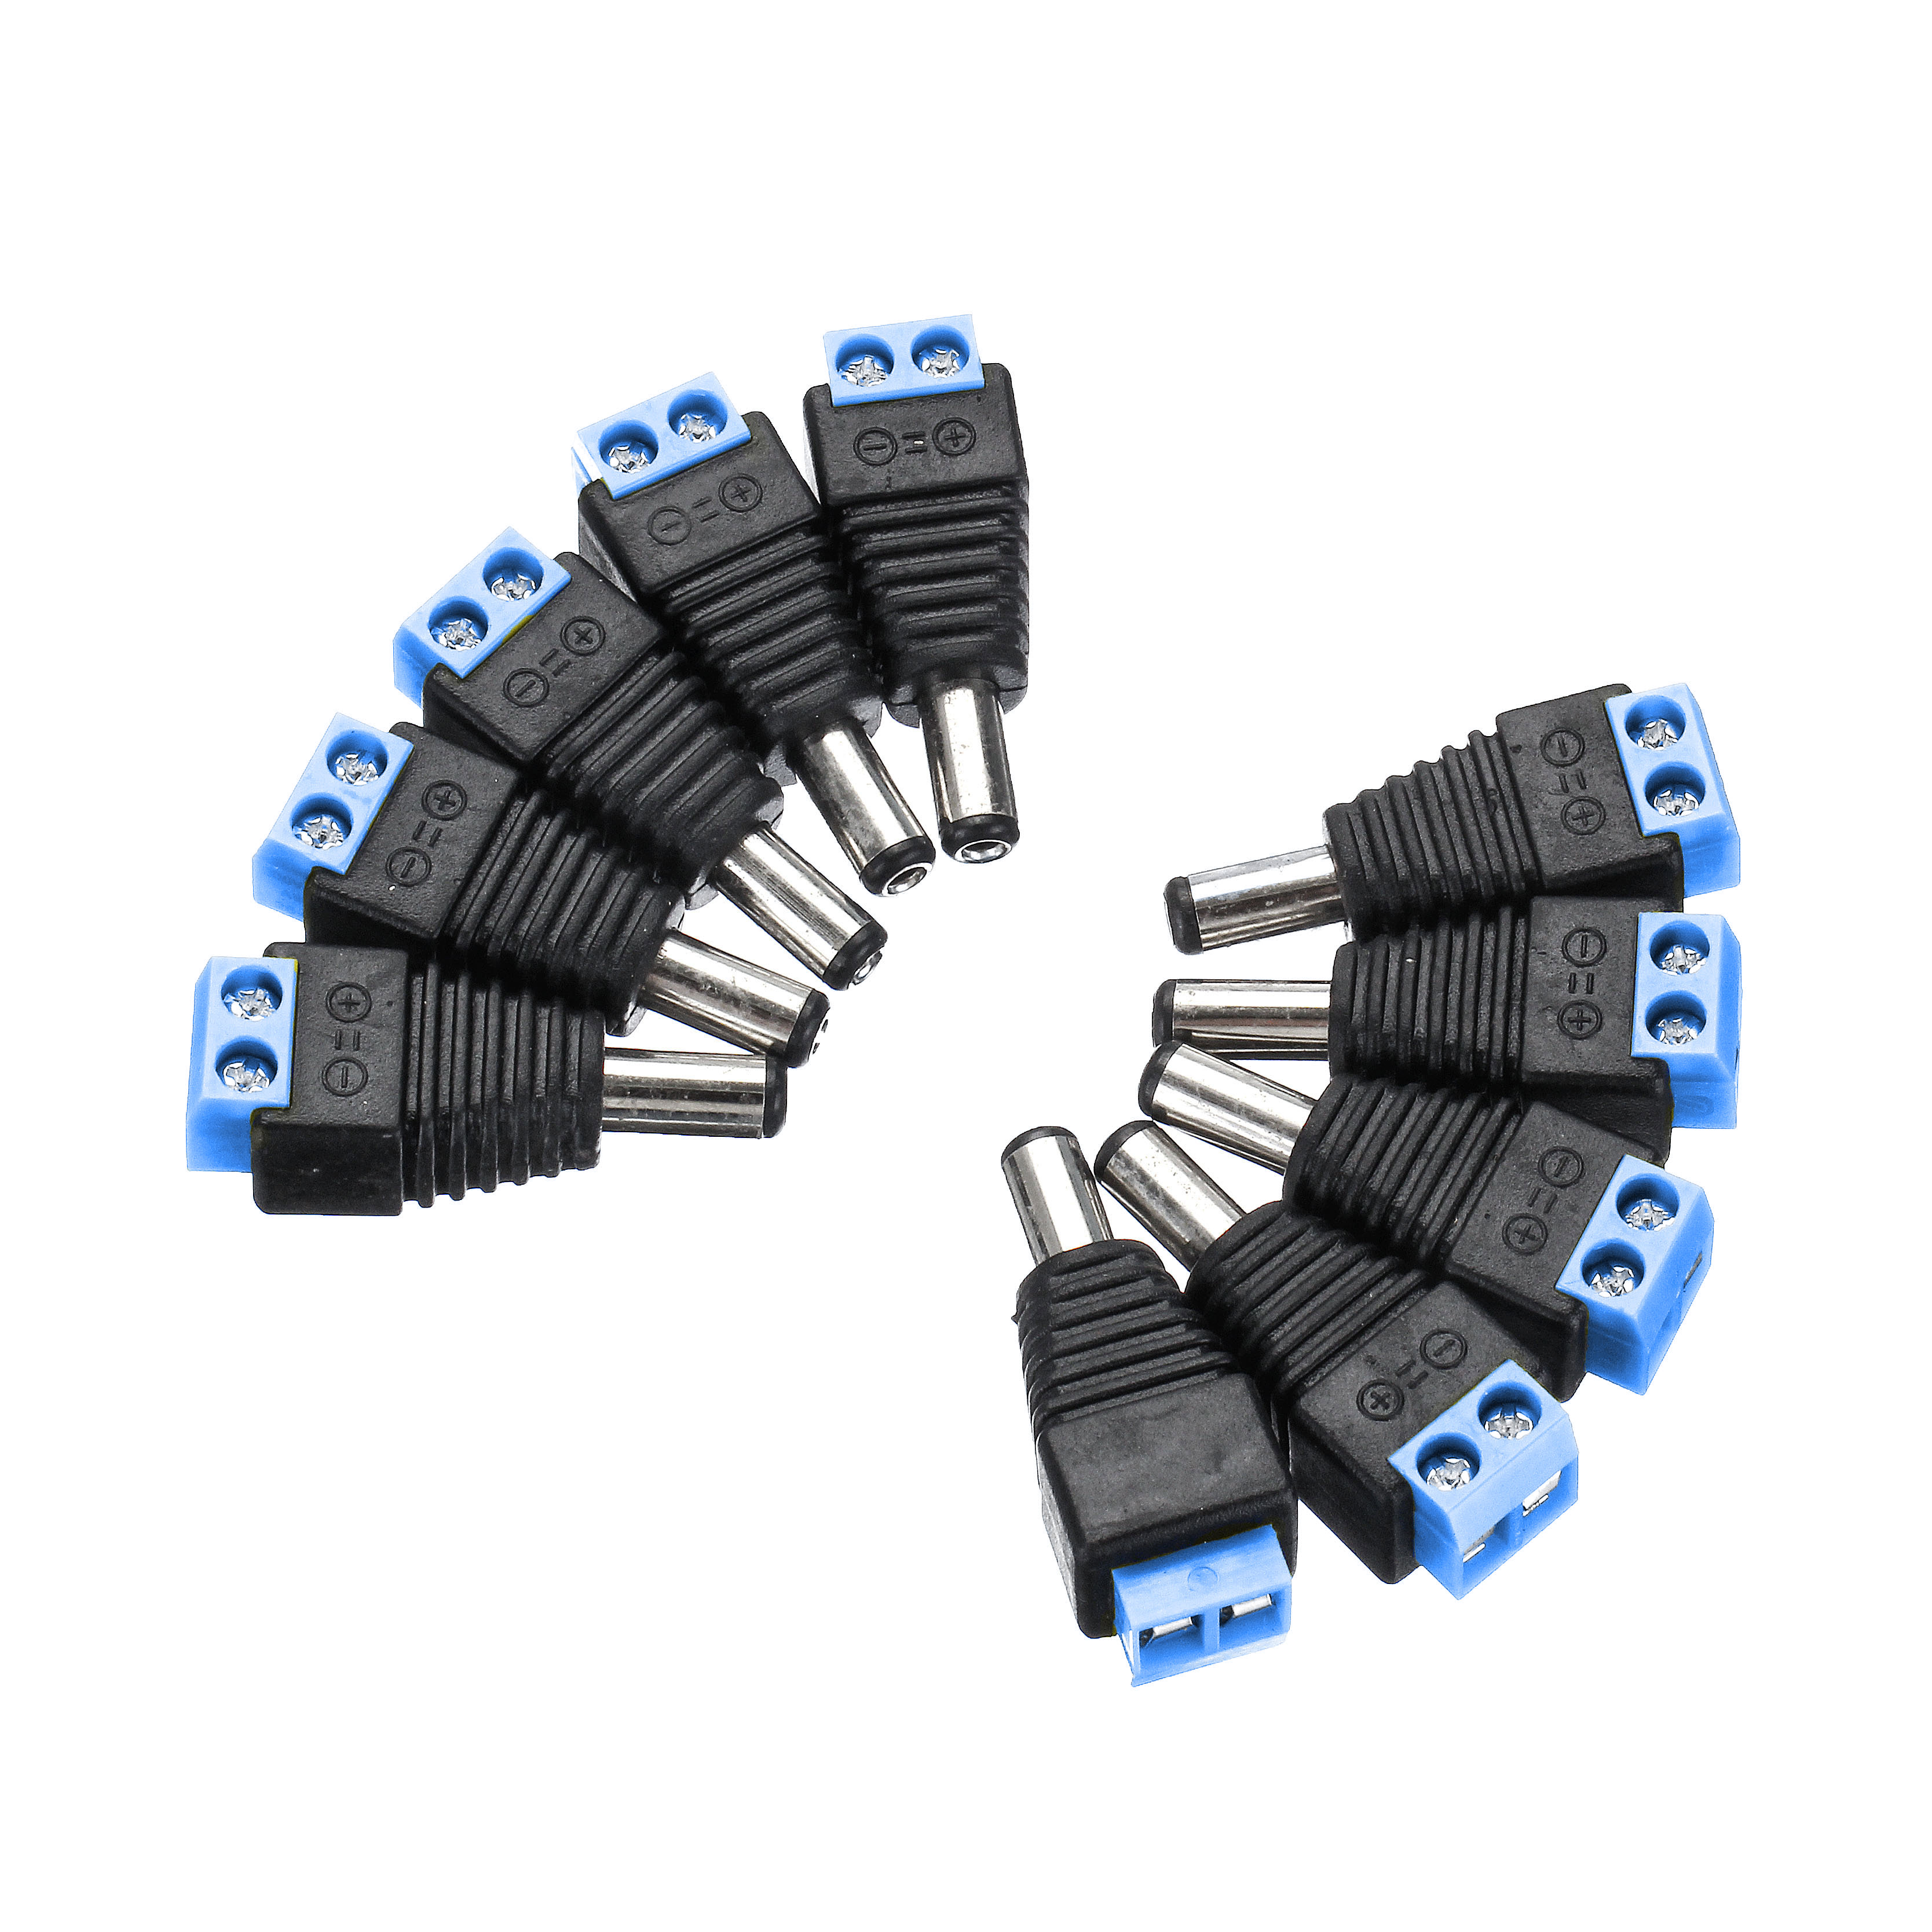 LED 10pcs DC Power Male 5.5 x 2.1mm Jack Adapter Cable Plug Connector for CCTV